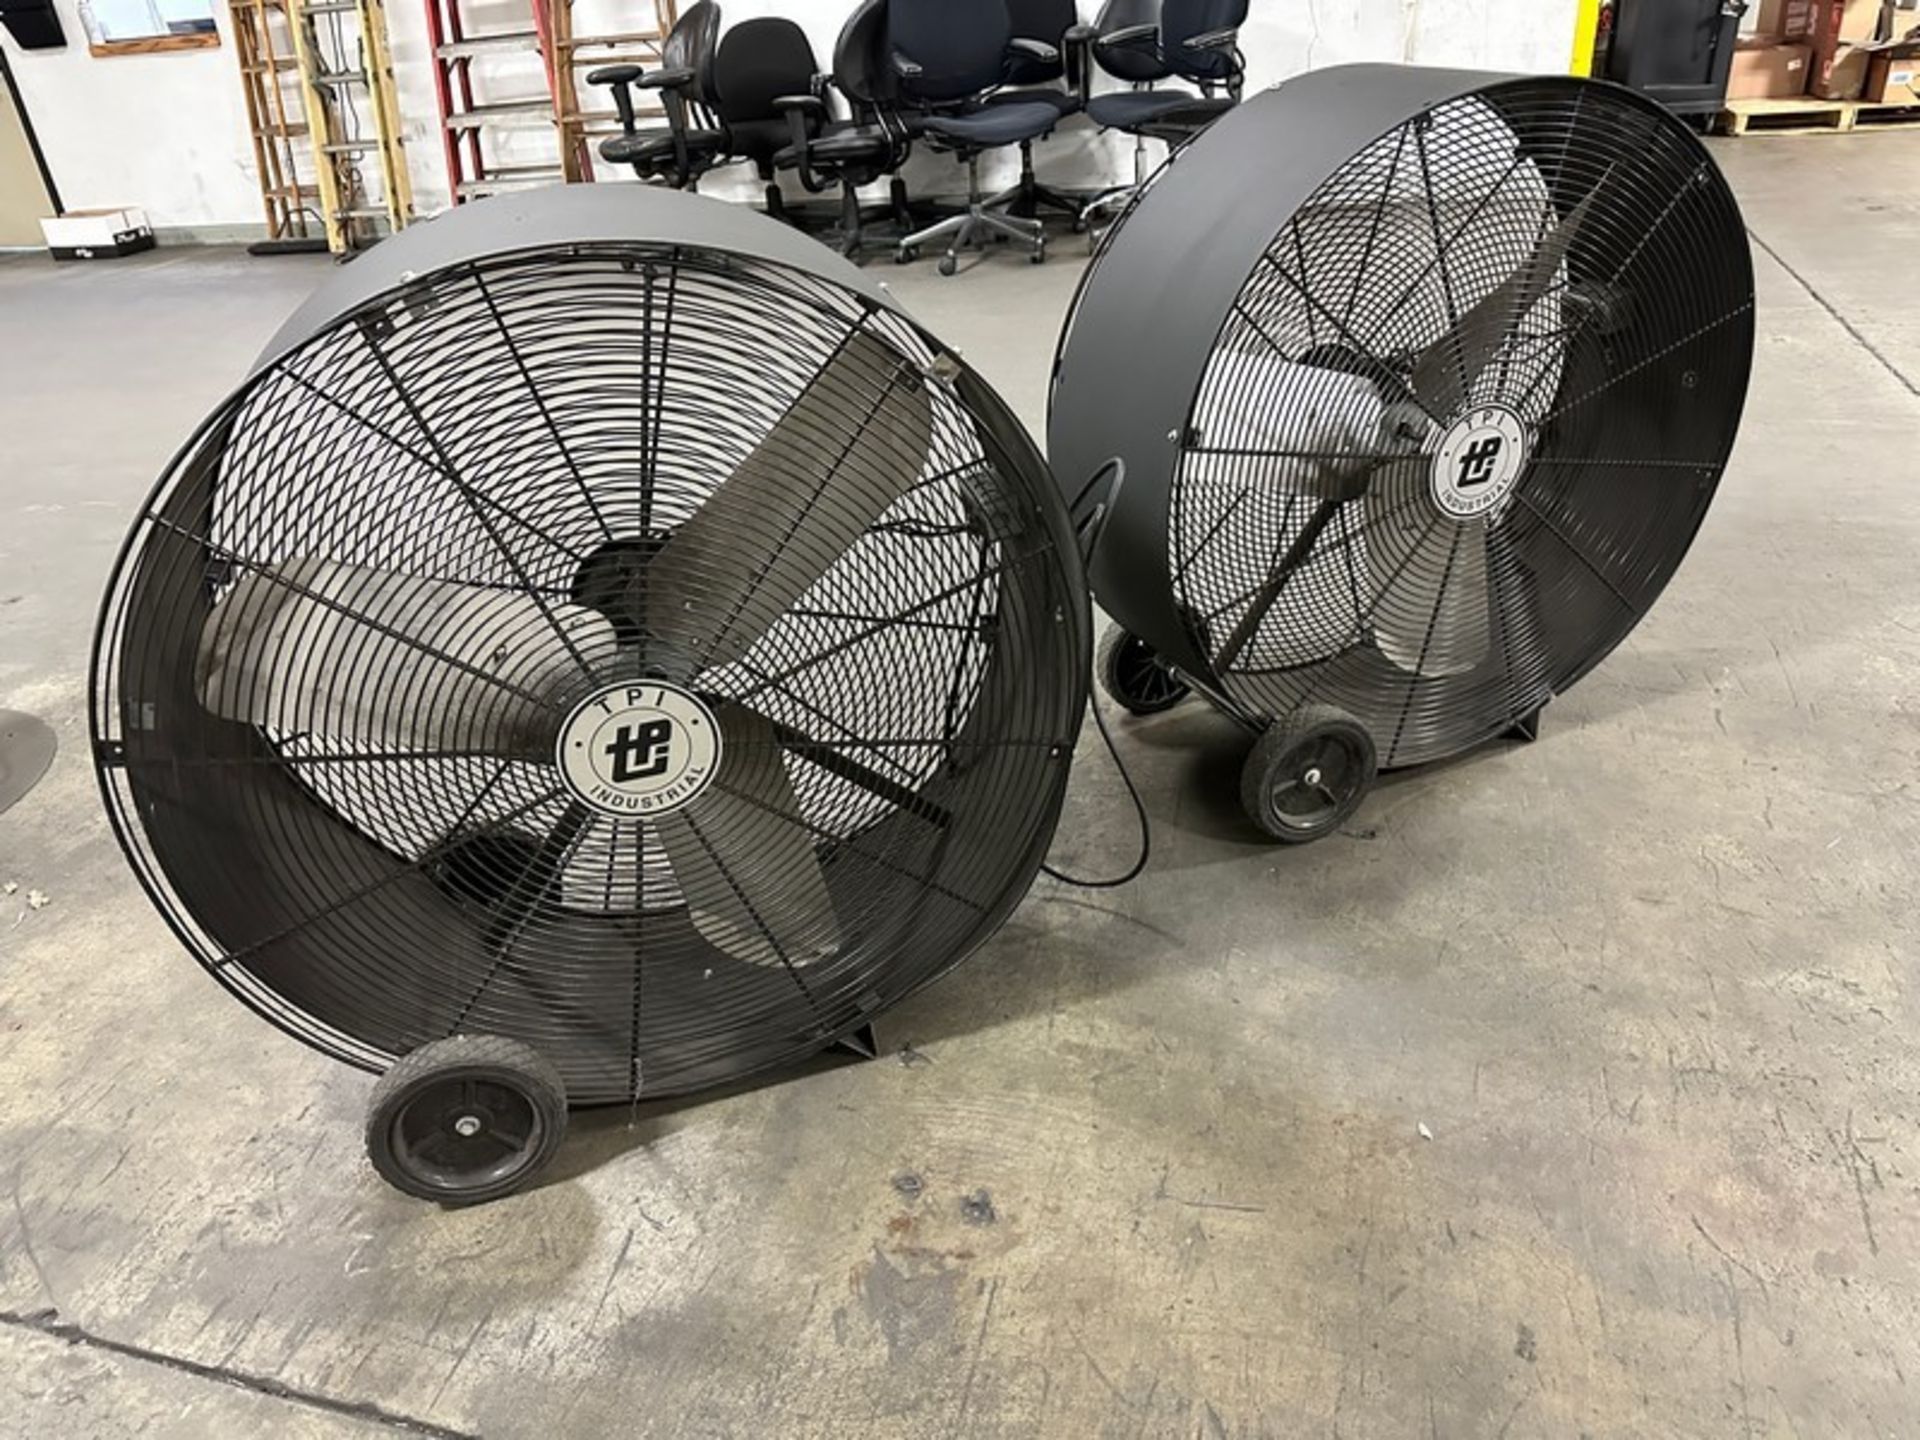 Drum Fans: LOT (2pcs) TPI 36" Portable Direct Drive, TPI pb-36d (Located East Rutherford, NJ) (NOTE: